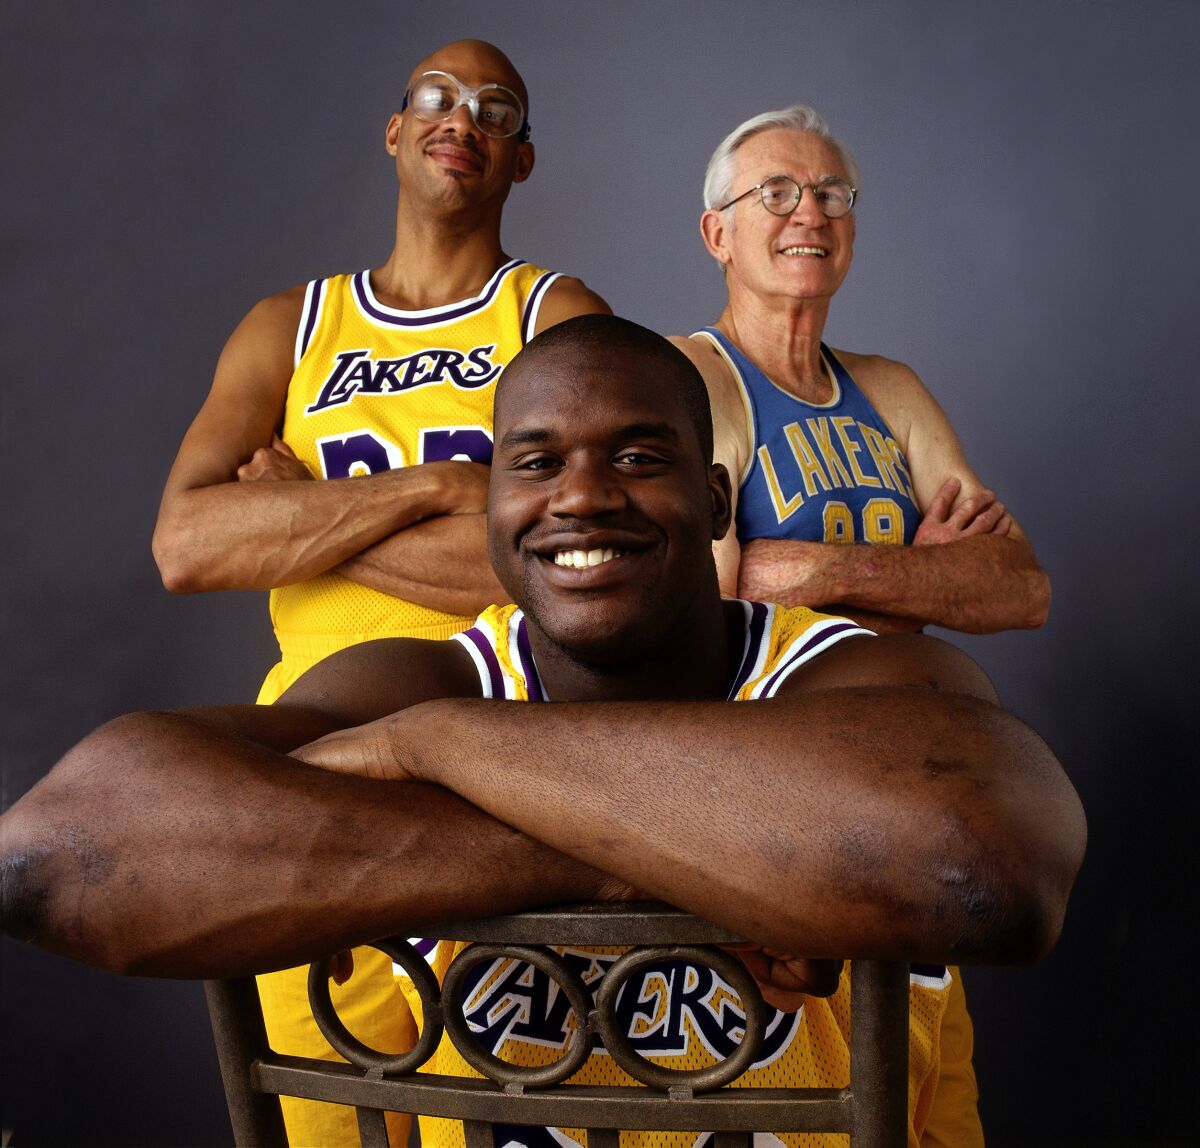 Shaquille O'Neal poses with Laker greats Kareem Abdul-Jabbar and George Mikan in 1996.